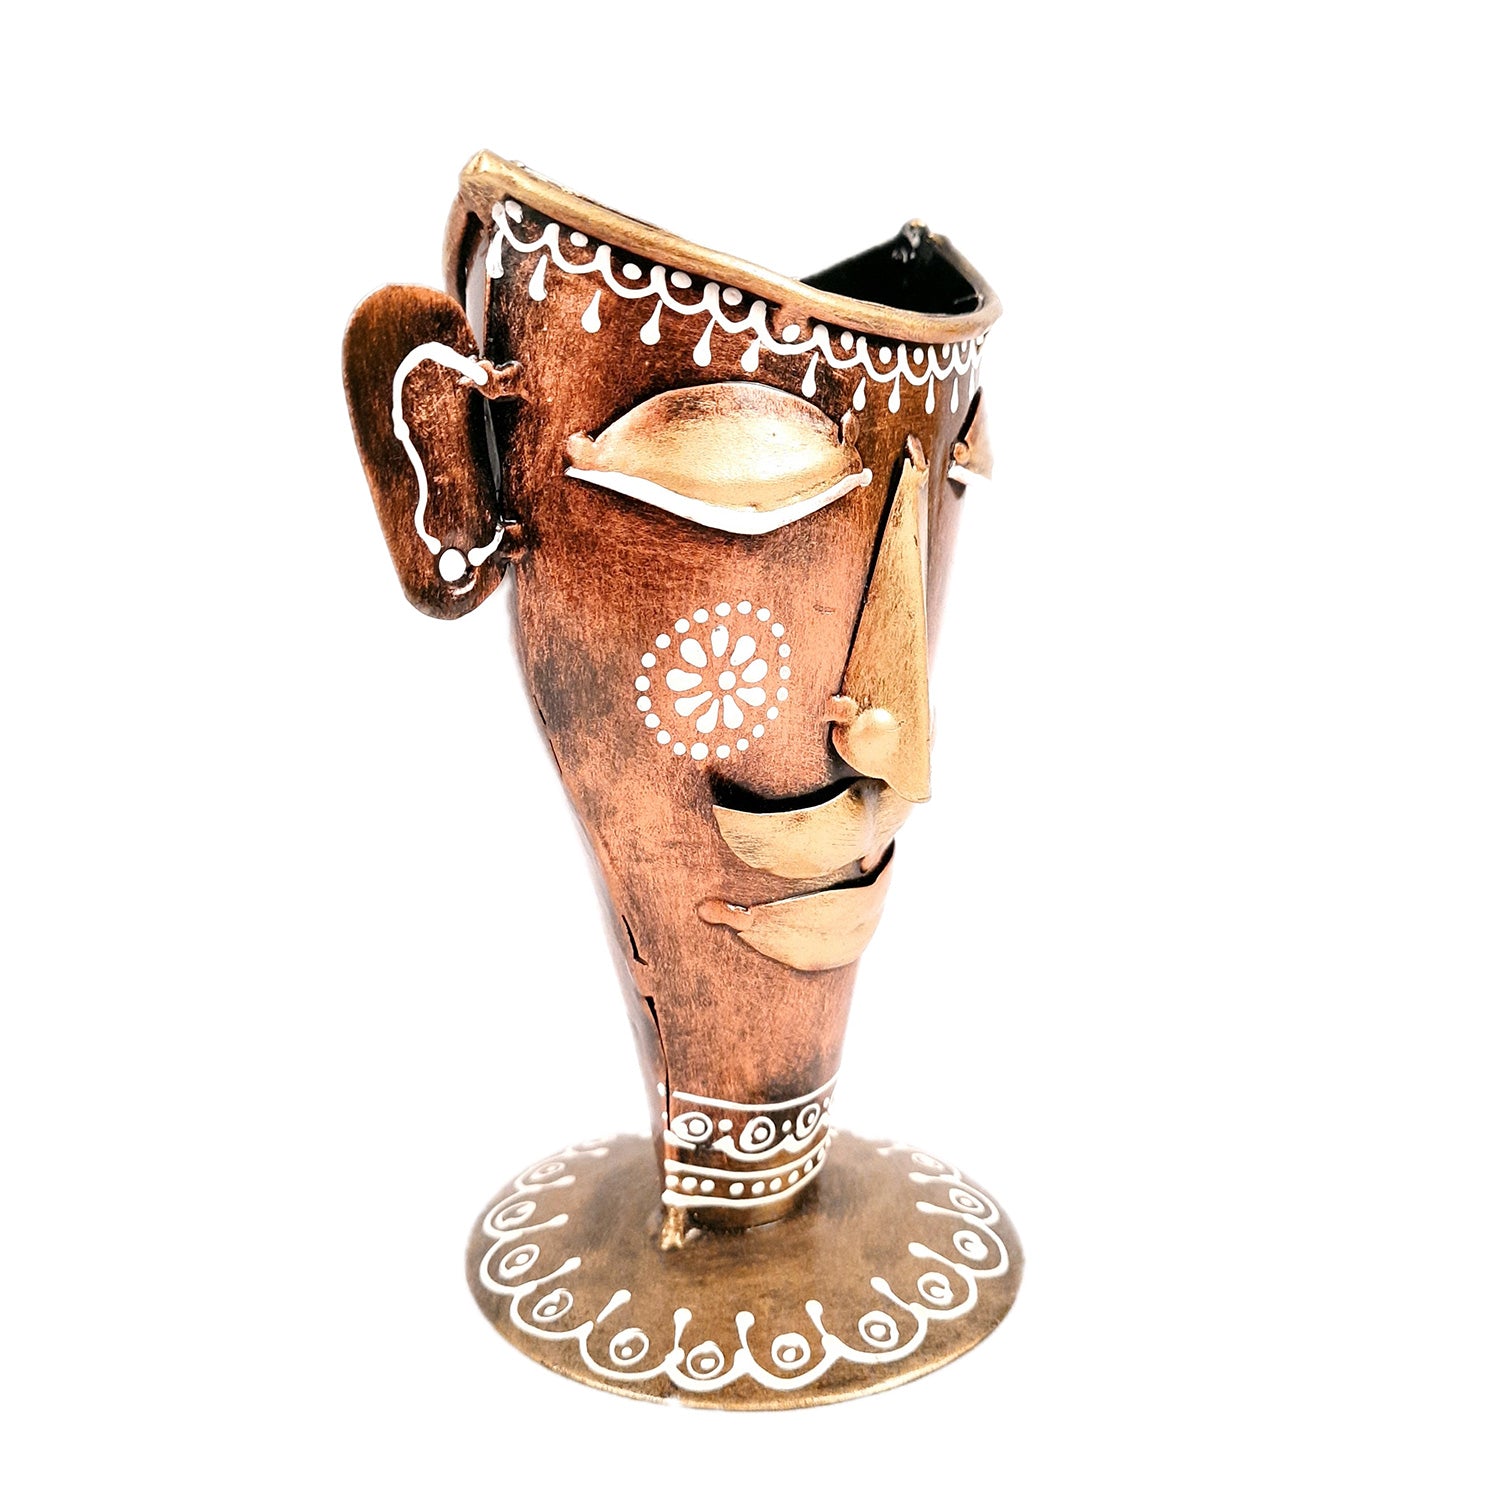 Vase | Flower Pot - Metal | Showpiece Cum Vase - Man Face Design - for Home Decoration, Living Room, Table, Shelf, Office , Interior Decor | Gifts for All Occasions - 7 Inch